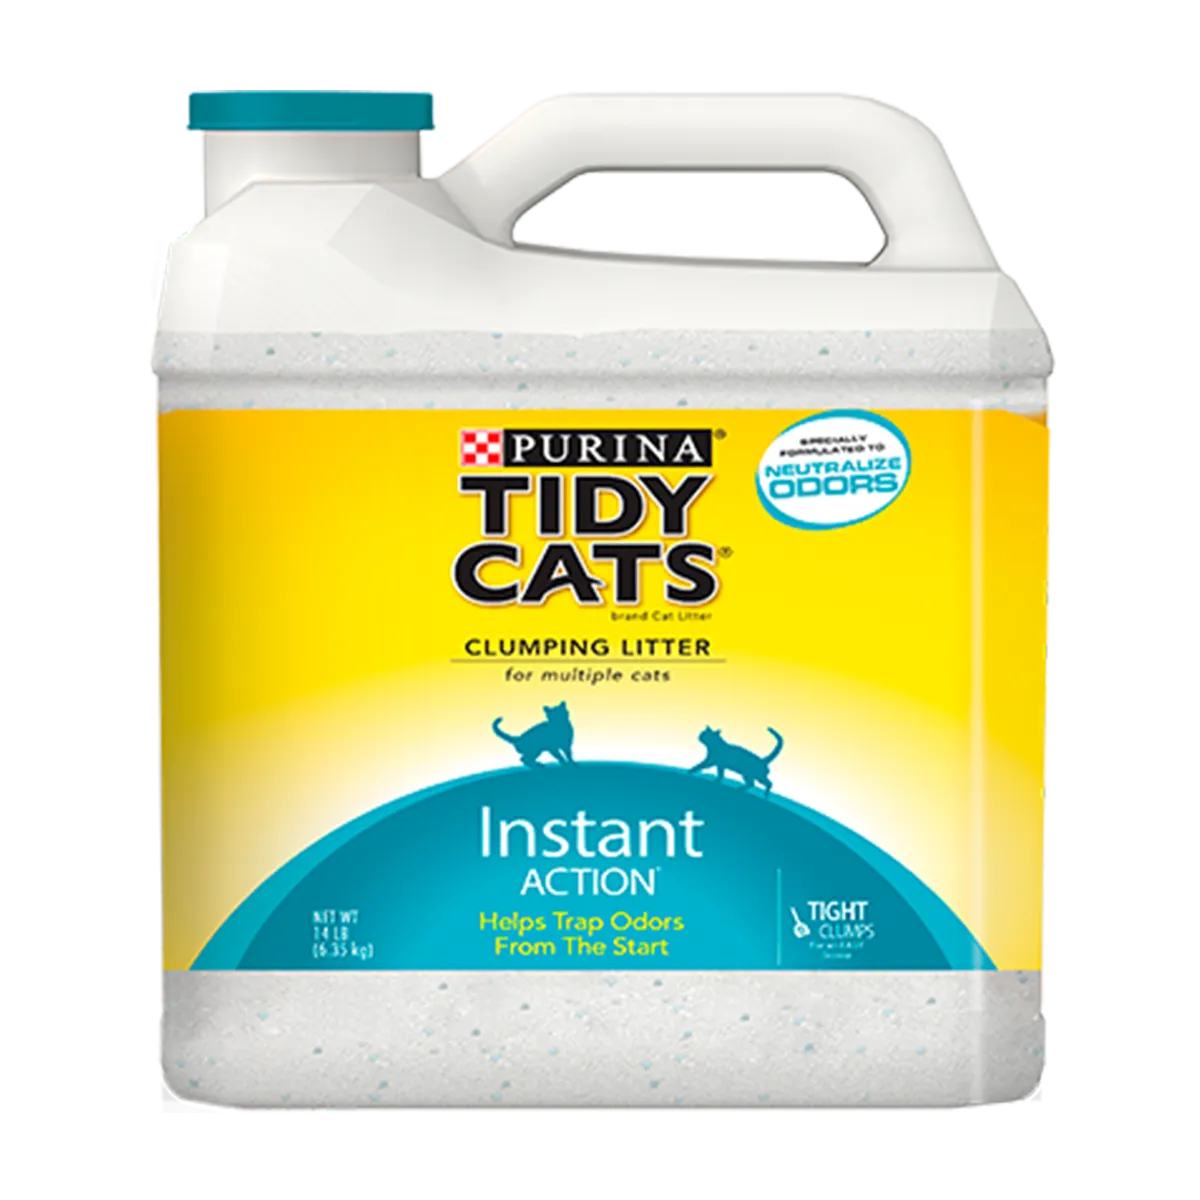 Purina Tidy Cats® instant action (1)